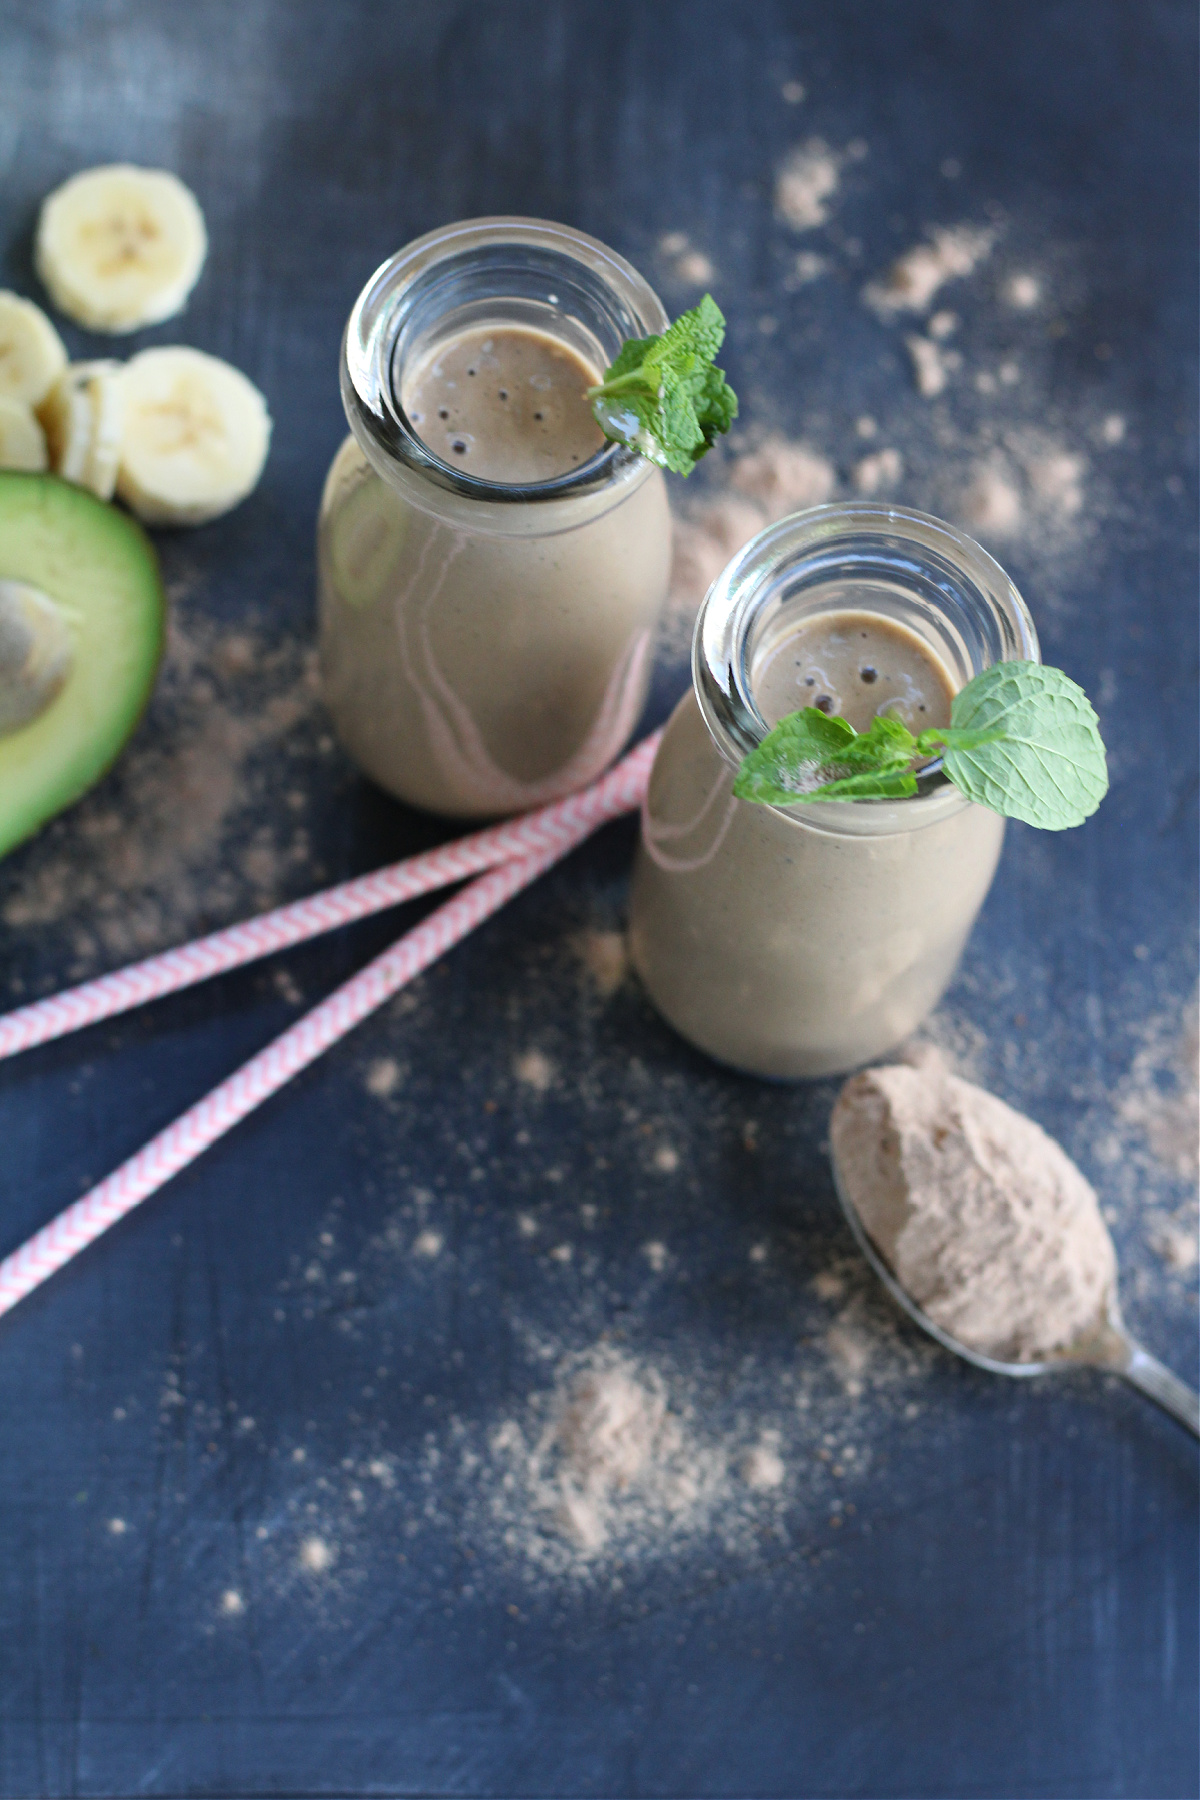 How to make a Mint Chocolate Protein Shake